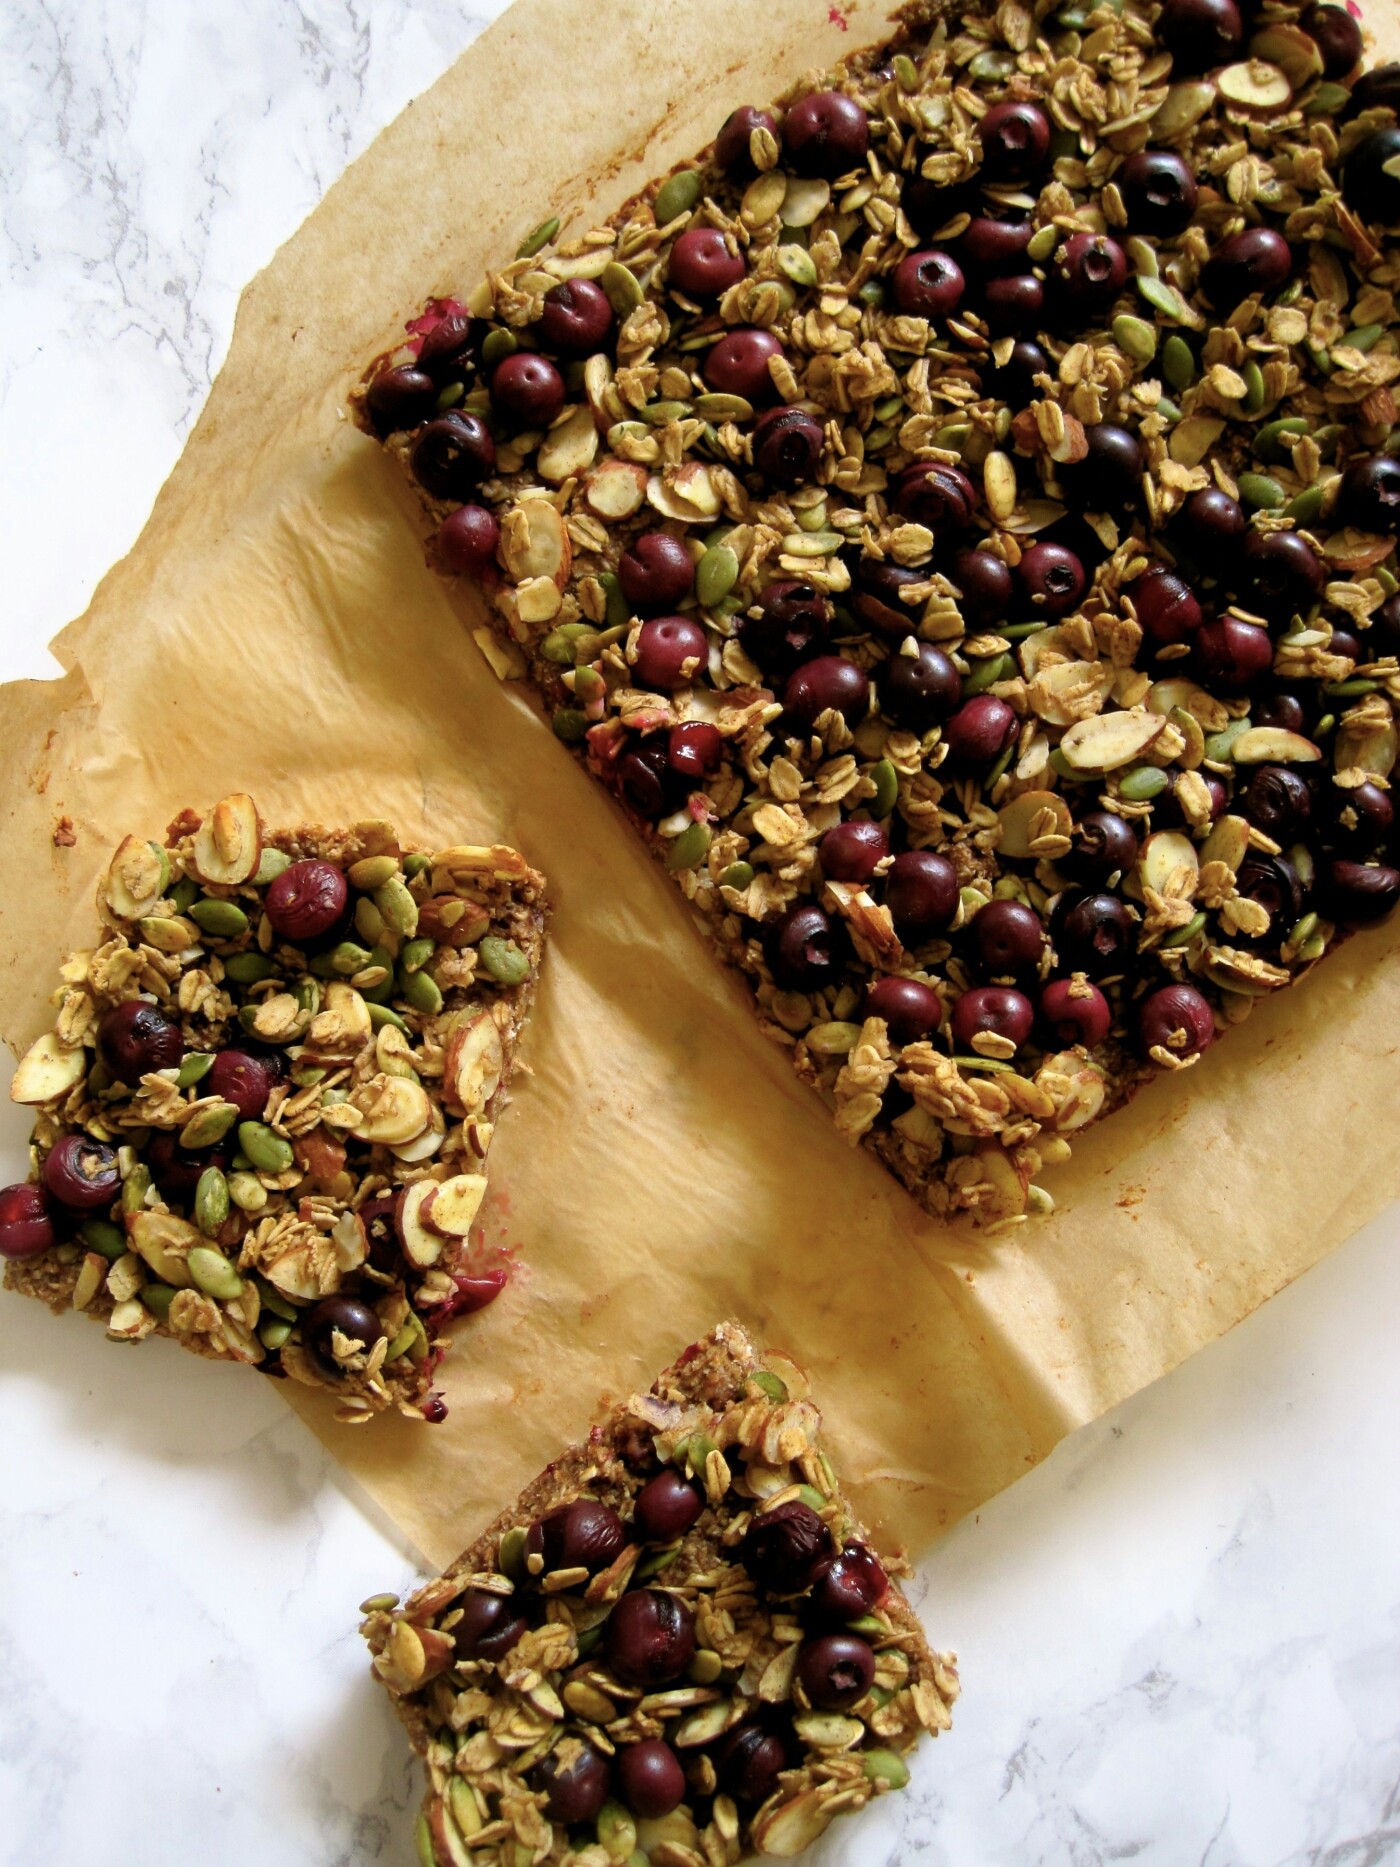 Breakfast bars are the perfect solution to those rushed mornings when there’s no time to fix an elaborate meal. Bursting with fresh fruit, sprouted seeds, sliced nuts and oats, this snack will satisfy your cravings for crunch.